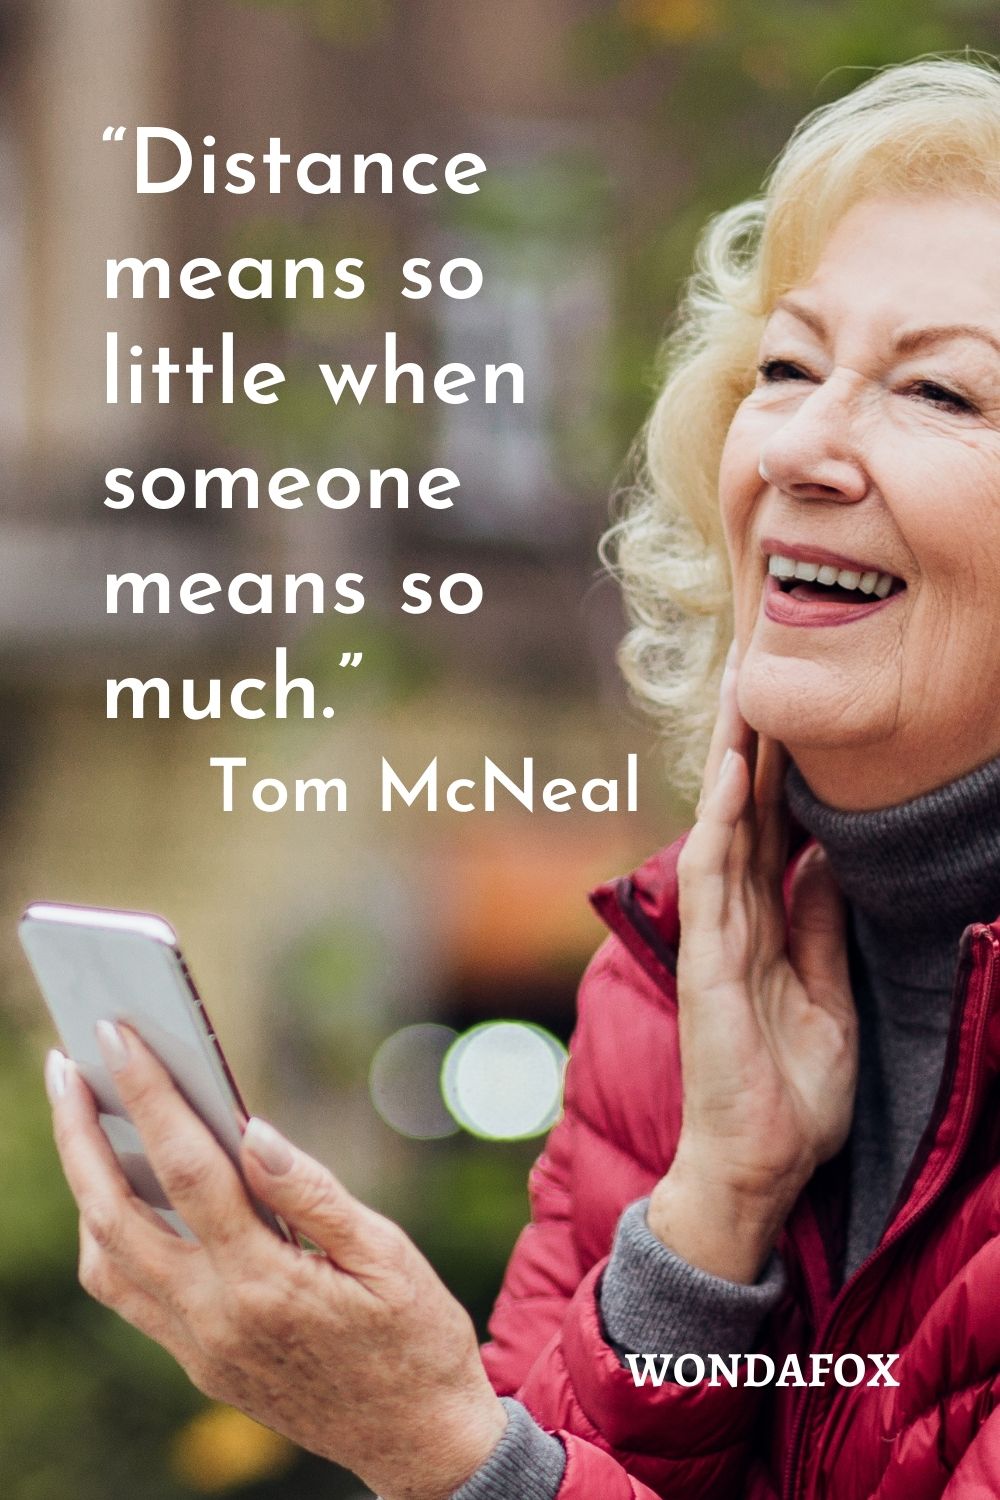 “Distance means so little when someone means so much.”
Tom McNeal